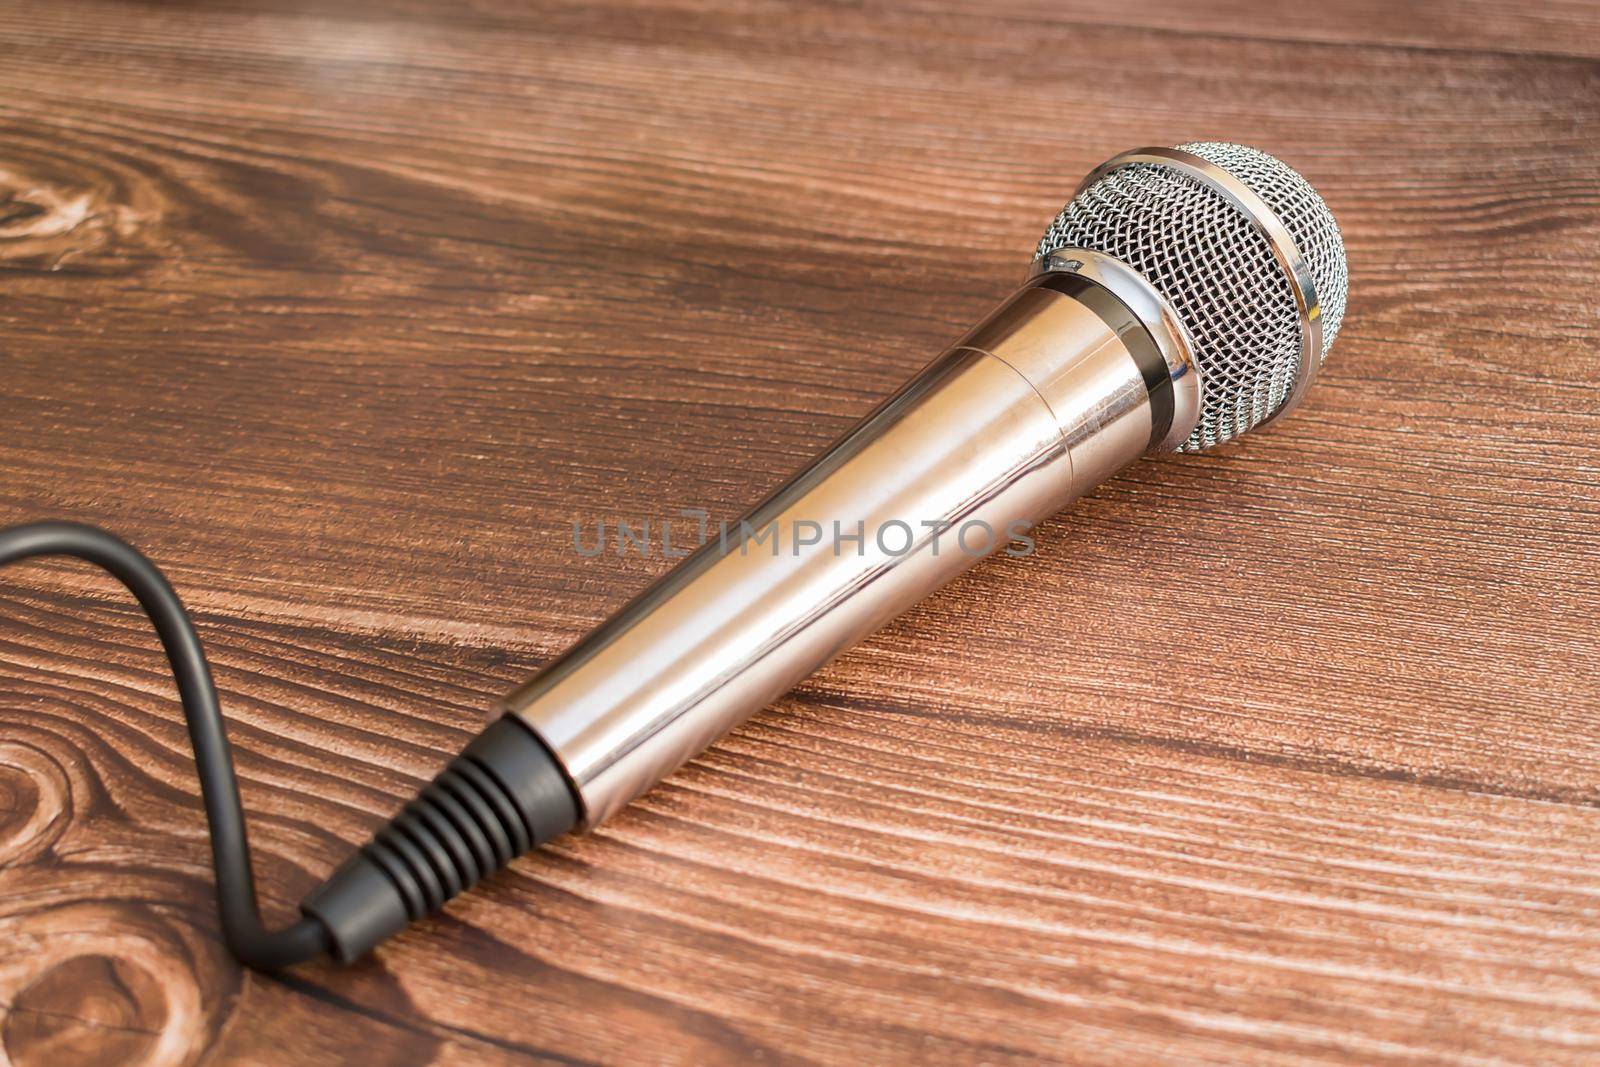 Music microphone for voice recording and singing karaoke